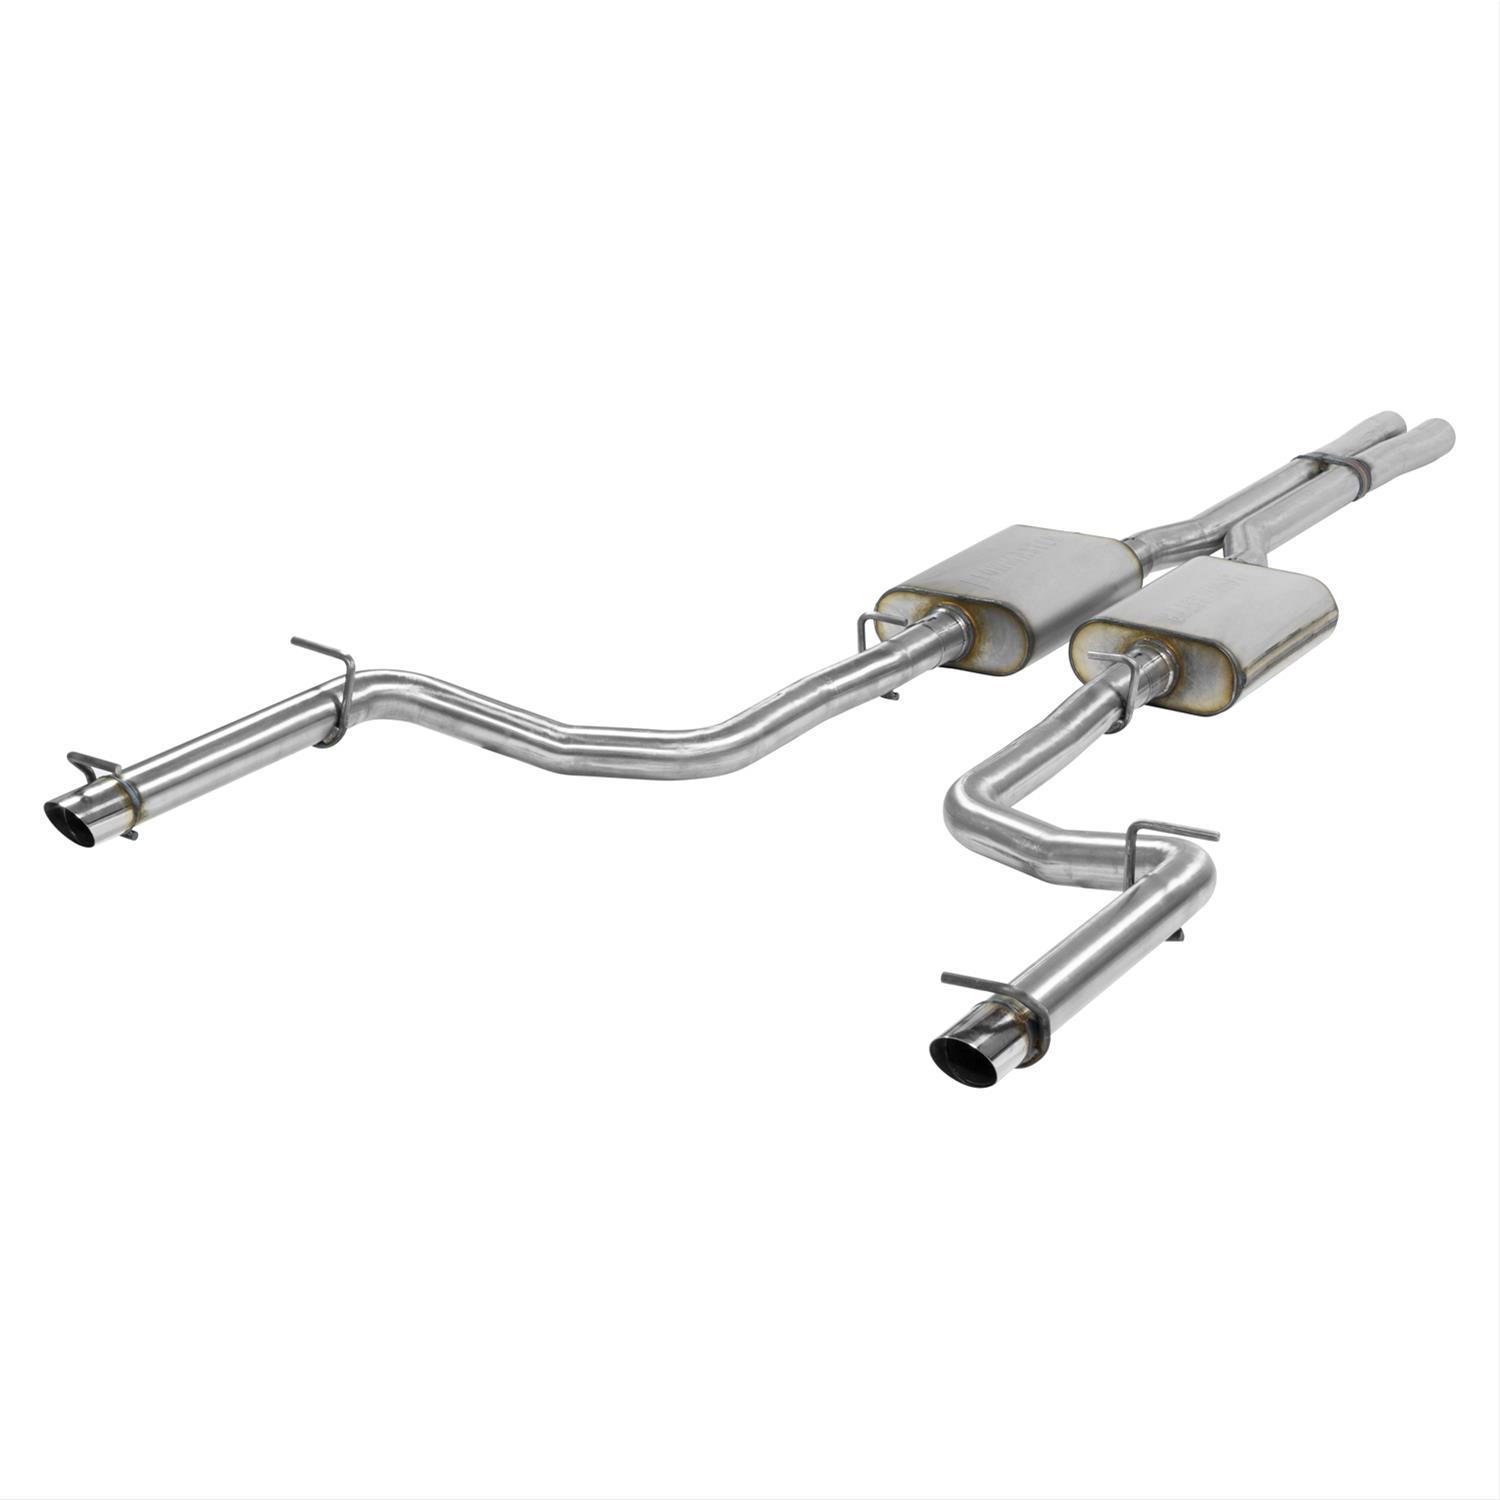 Flowmaster FlowFX Stainless Exhaust 11-14 Charger, Chrysler 5.7L